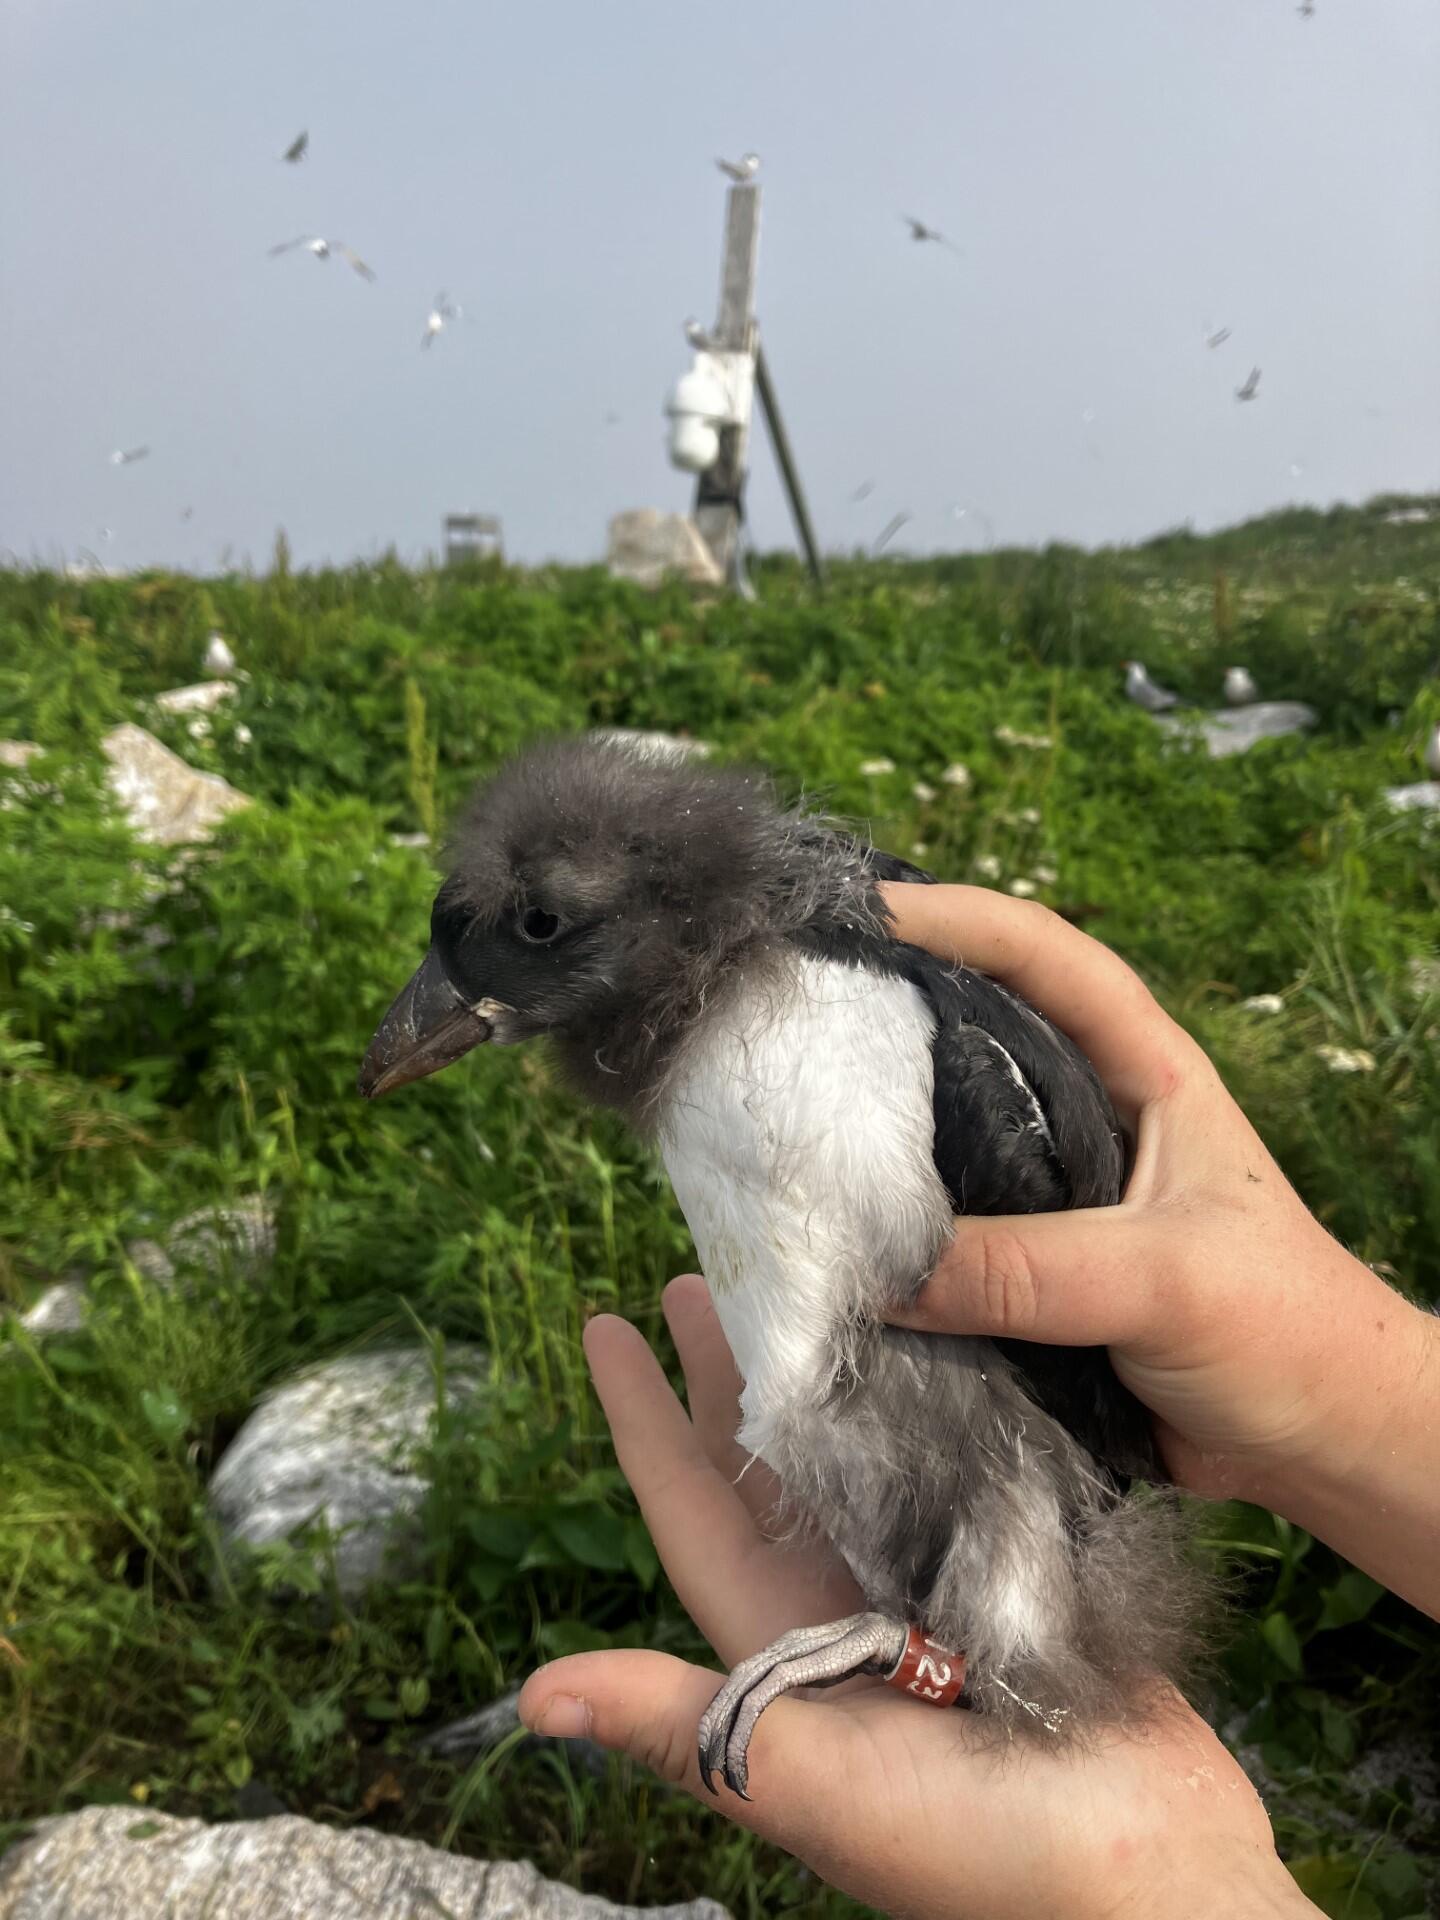 explore.org on-camera puffling, Duryea, wearing new bling (a leg band)